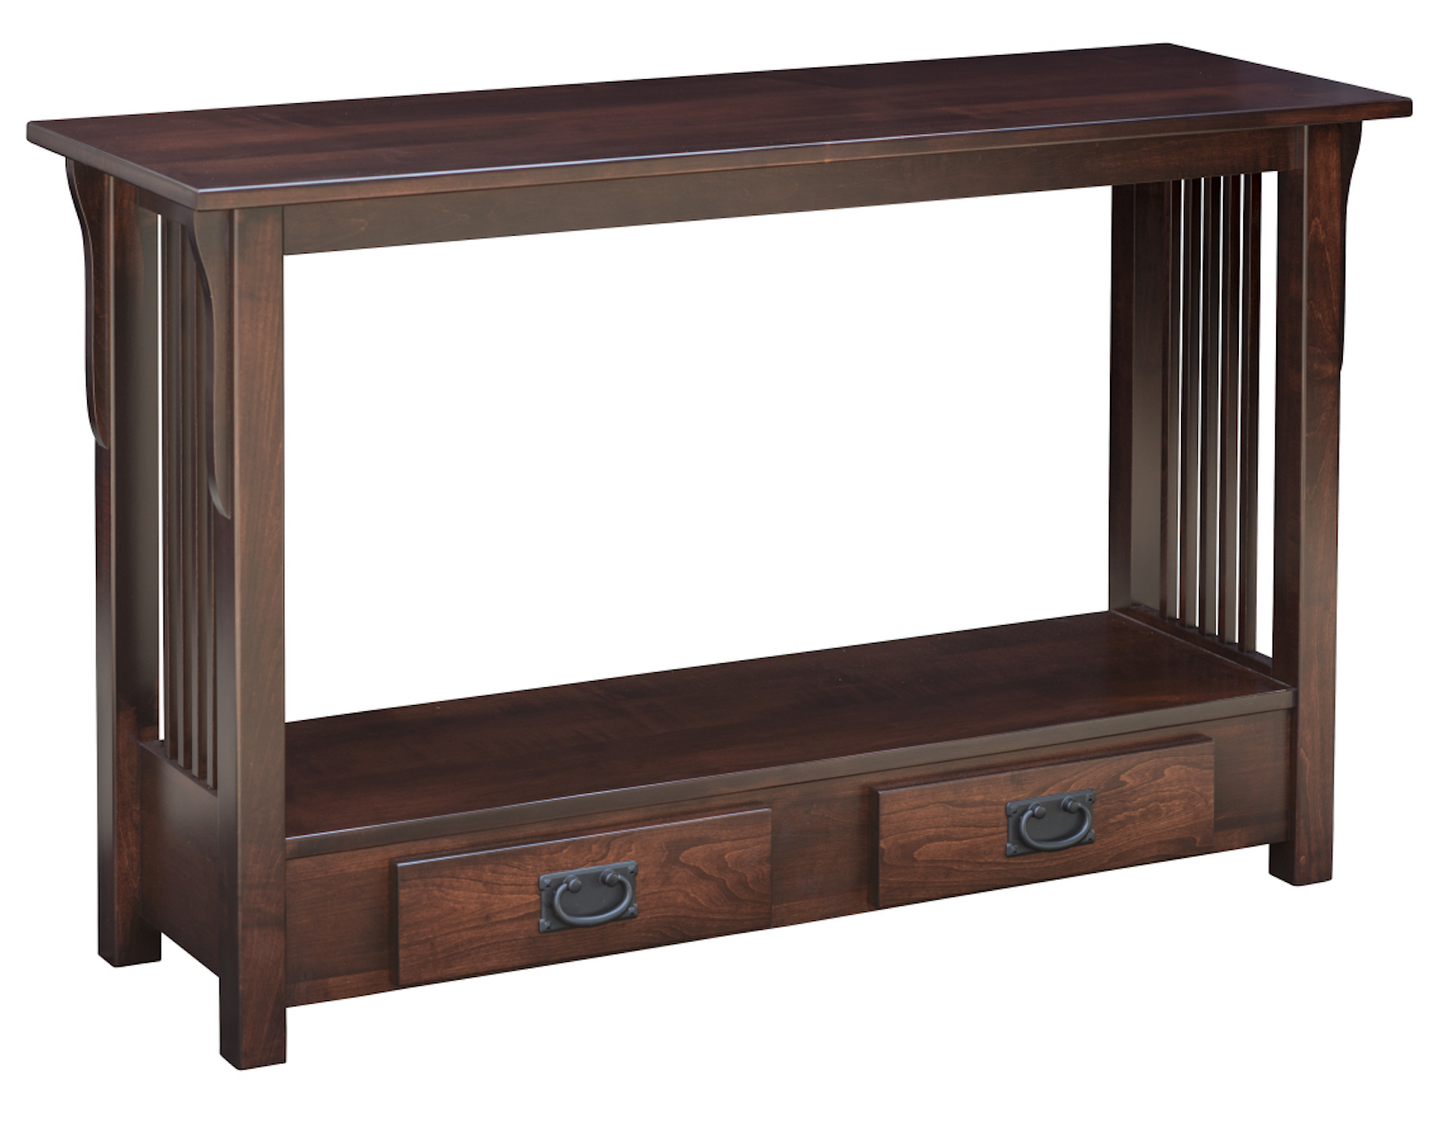 Prairie Mission 48" Sofa Table in Brown Maple